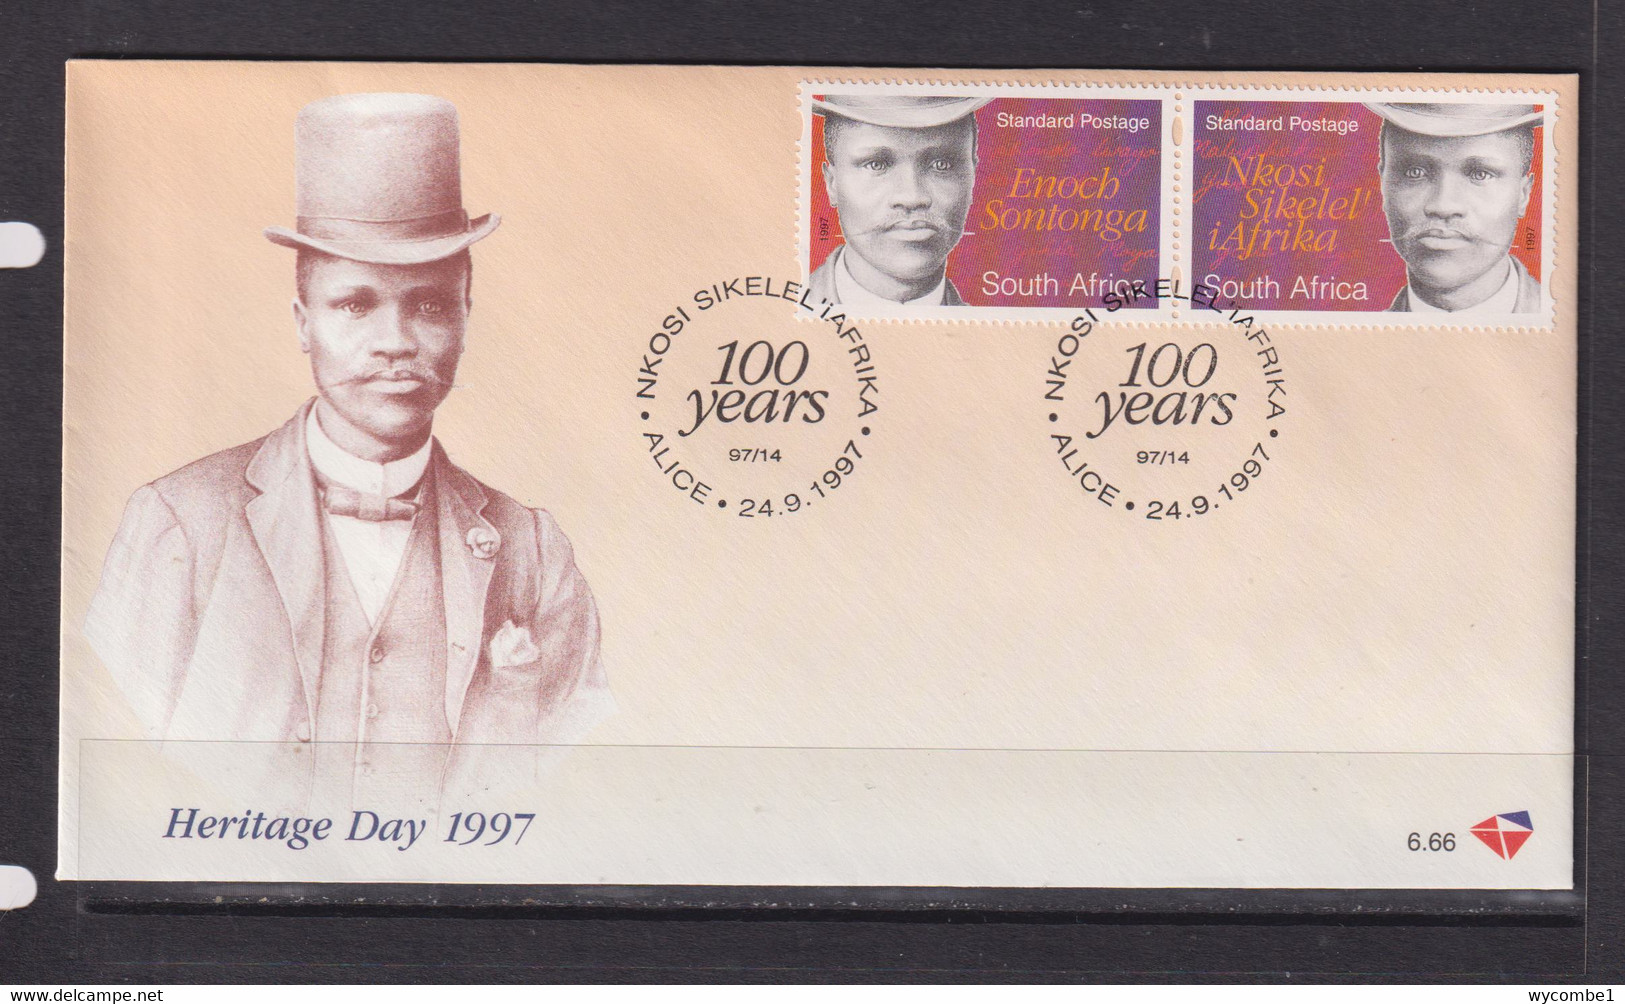 SOUTH AFRICA - 1997 Heritage Day FDC - Briefe U. Dokumente